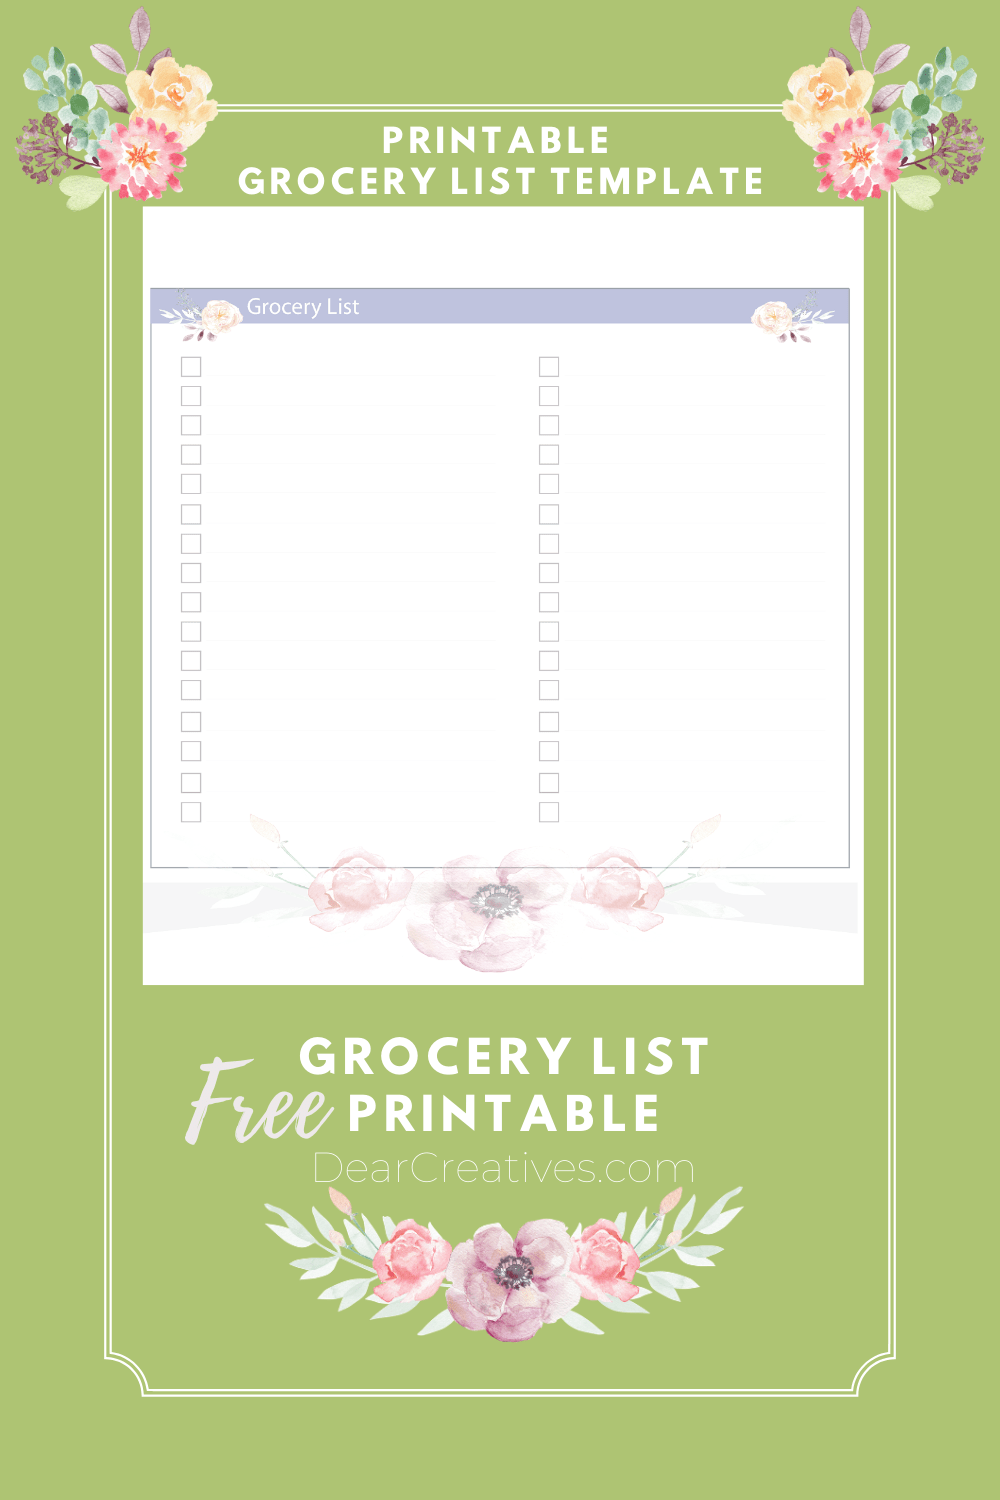 Printable Grocery List Template - Printable Grocery List - Print this grocery list cut to use when making your shopping list for groceries! DearCreatives.com